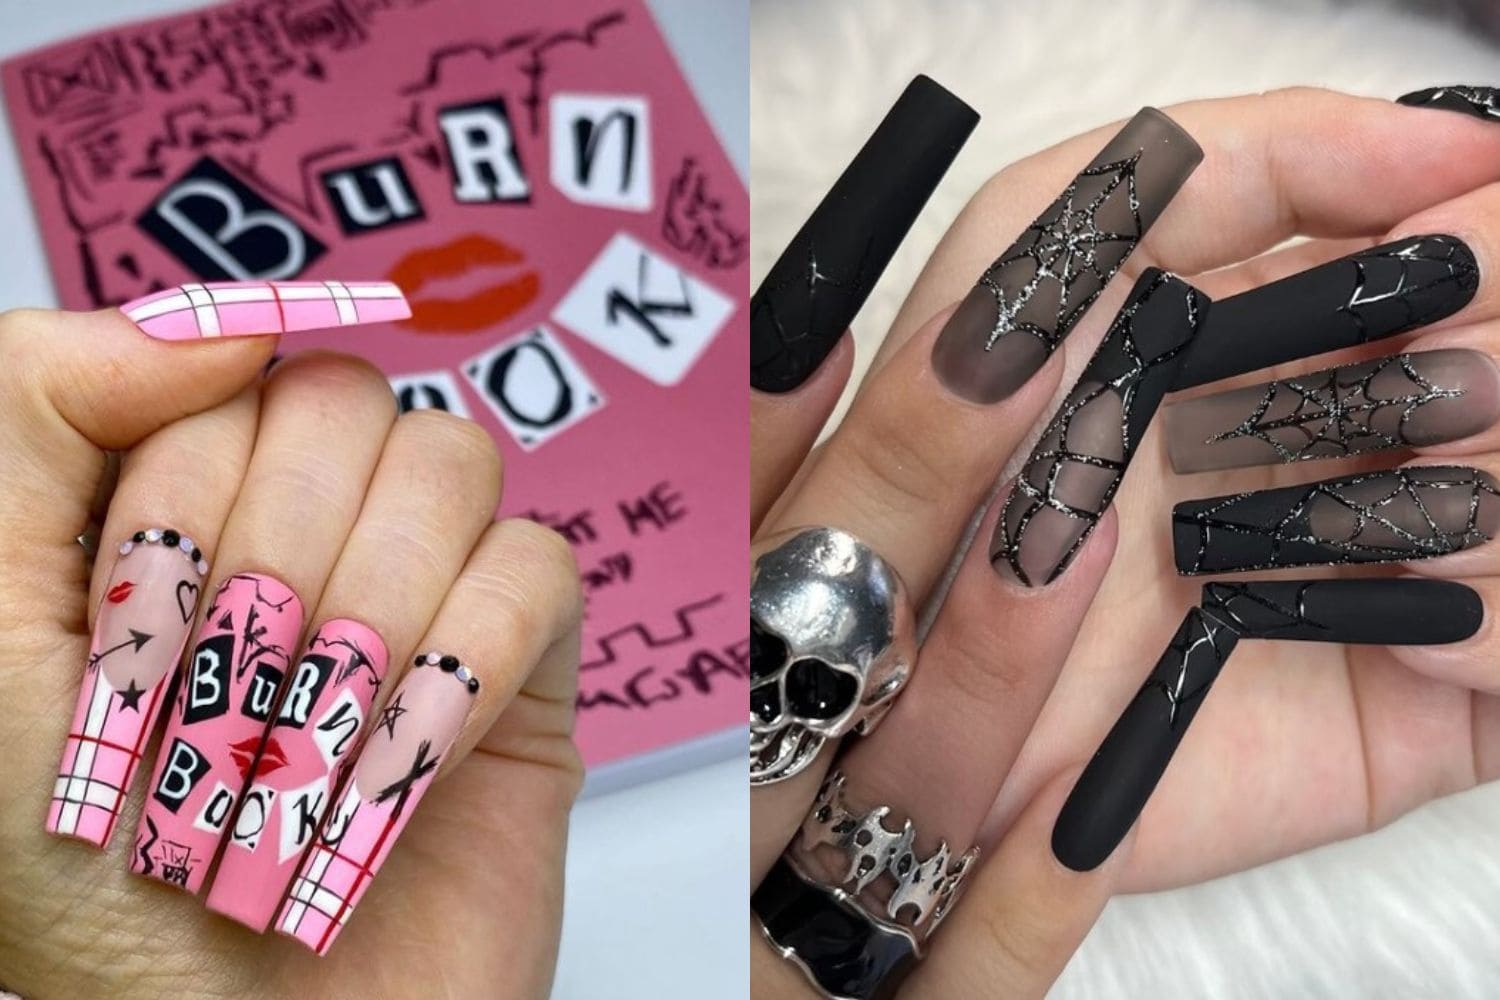 14 Summer Coffin Nail Ideas, From Neon Ombré To Pastel French Tips